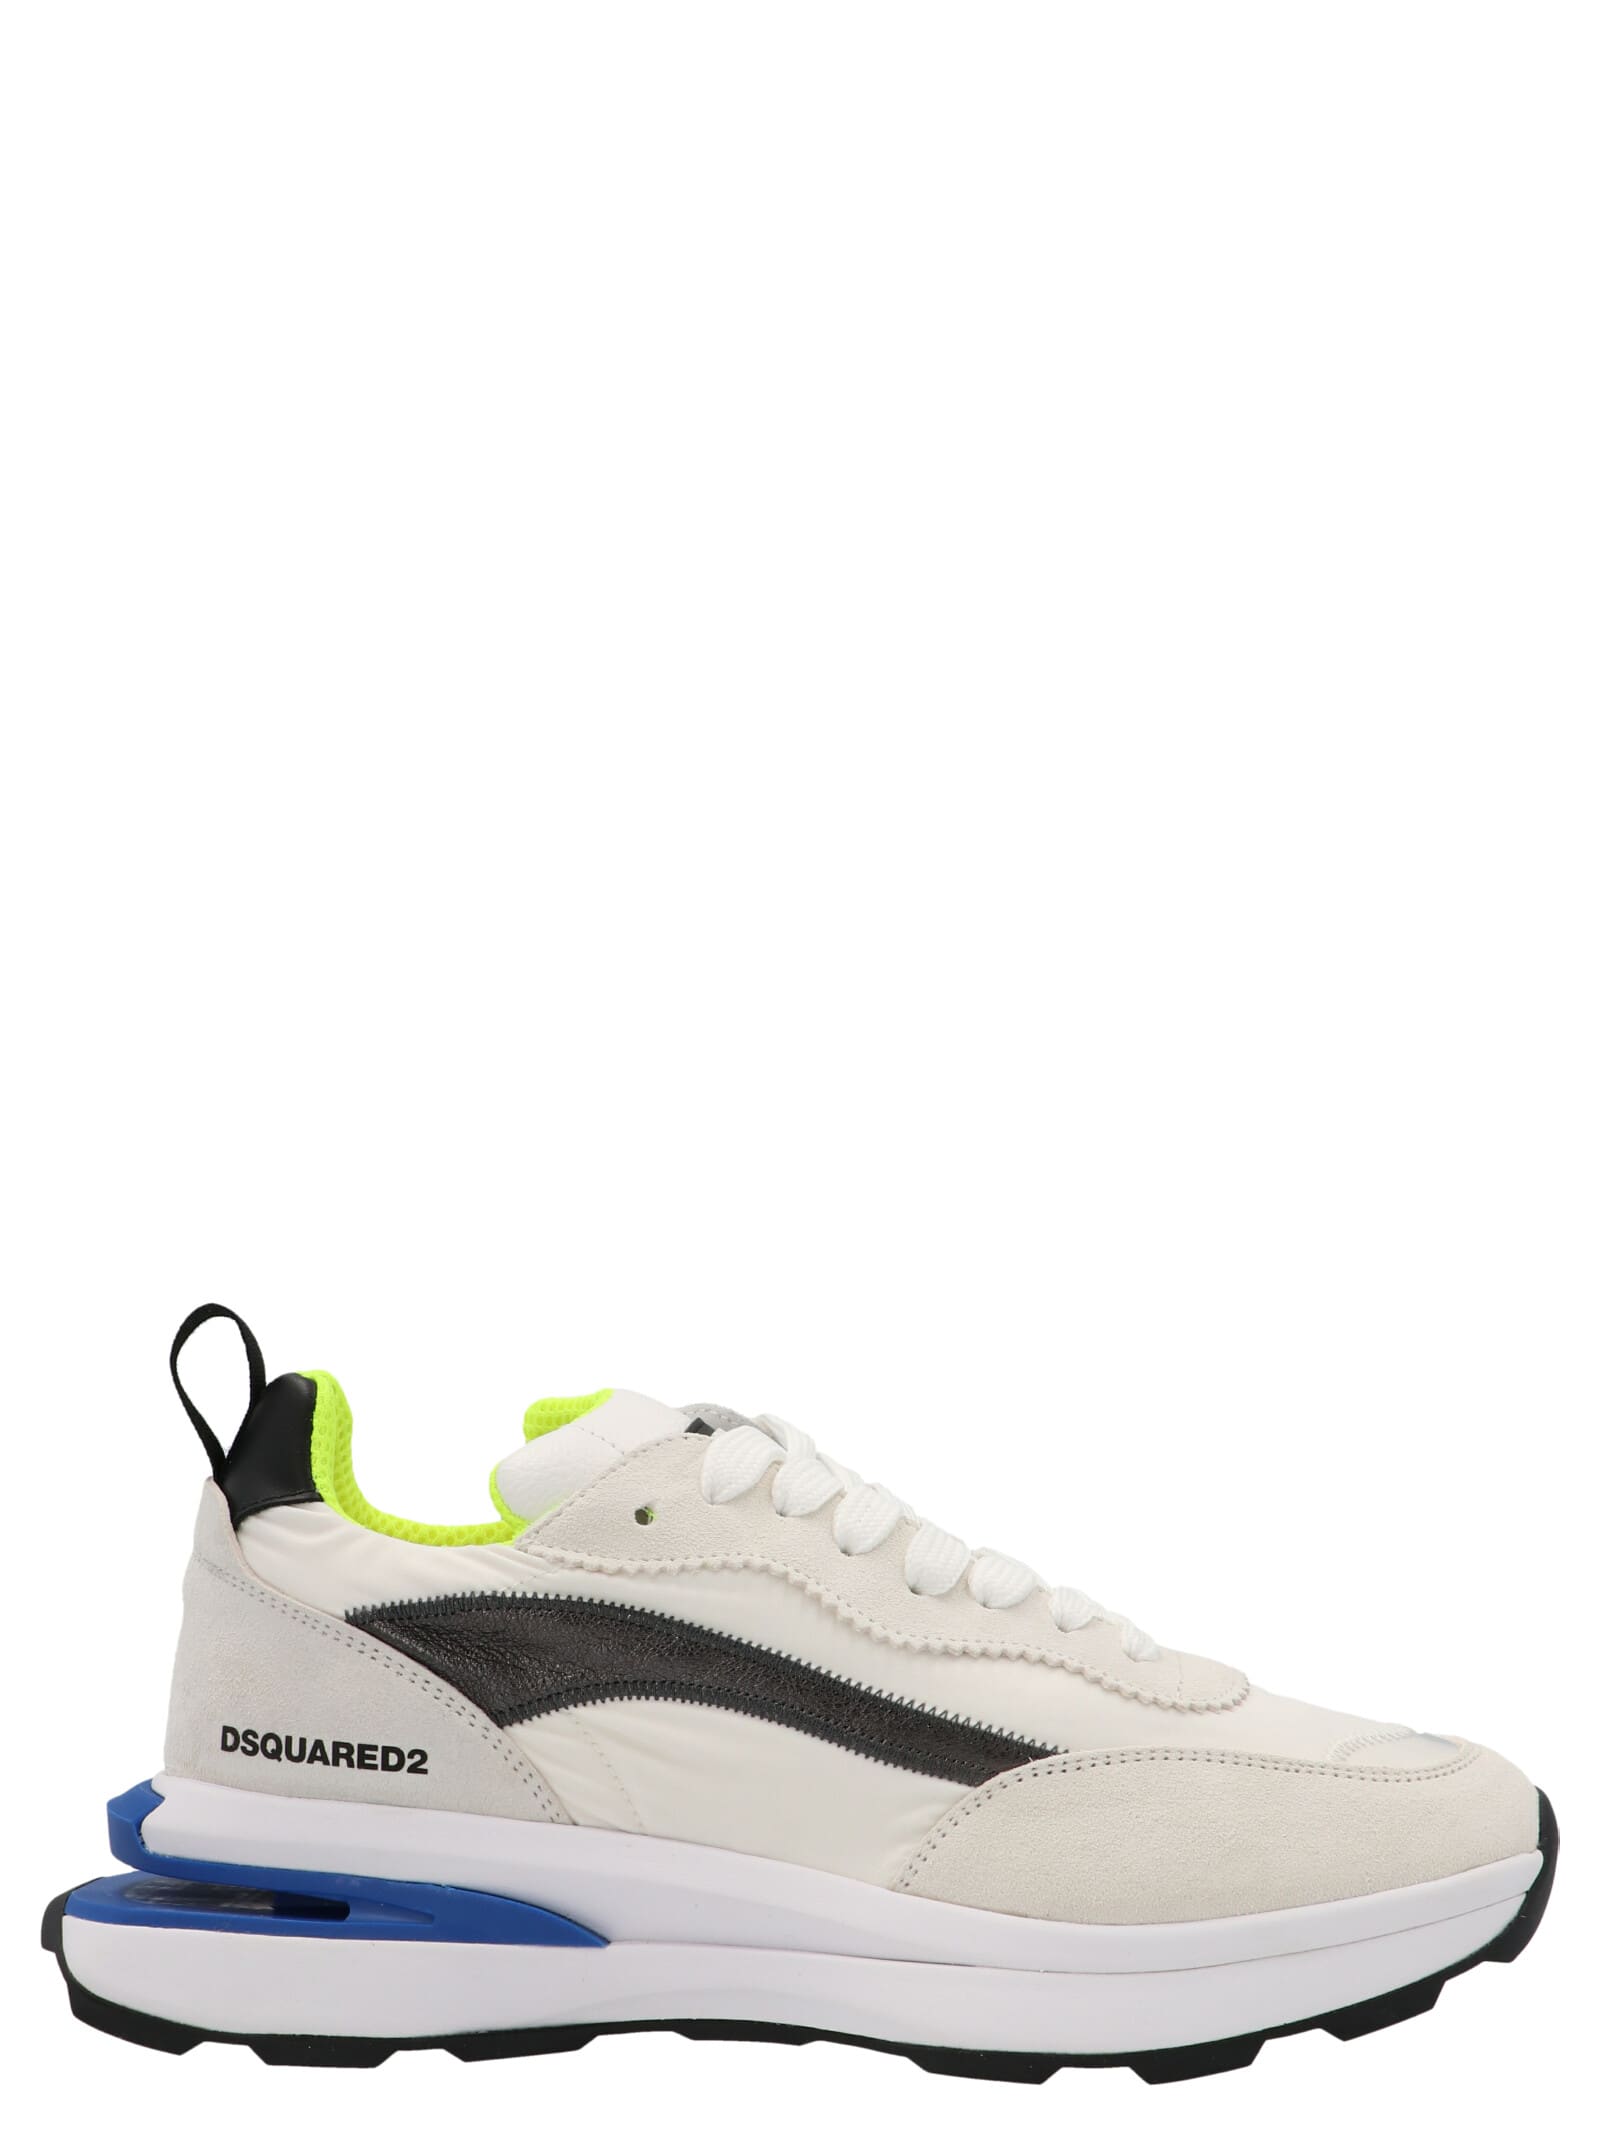 Dsquared2 dsquared Logo Sneakers